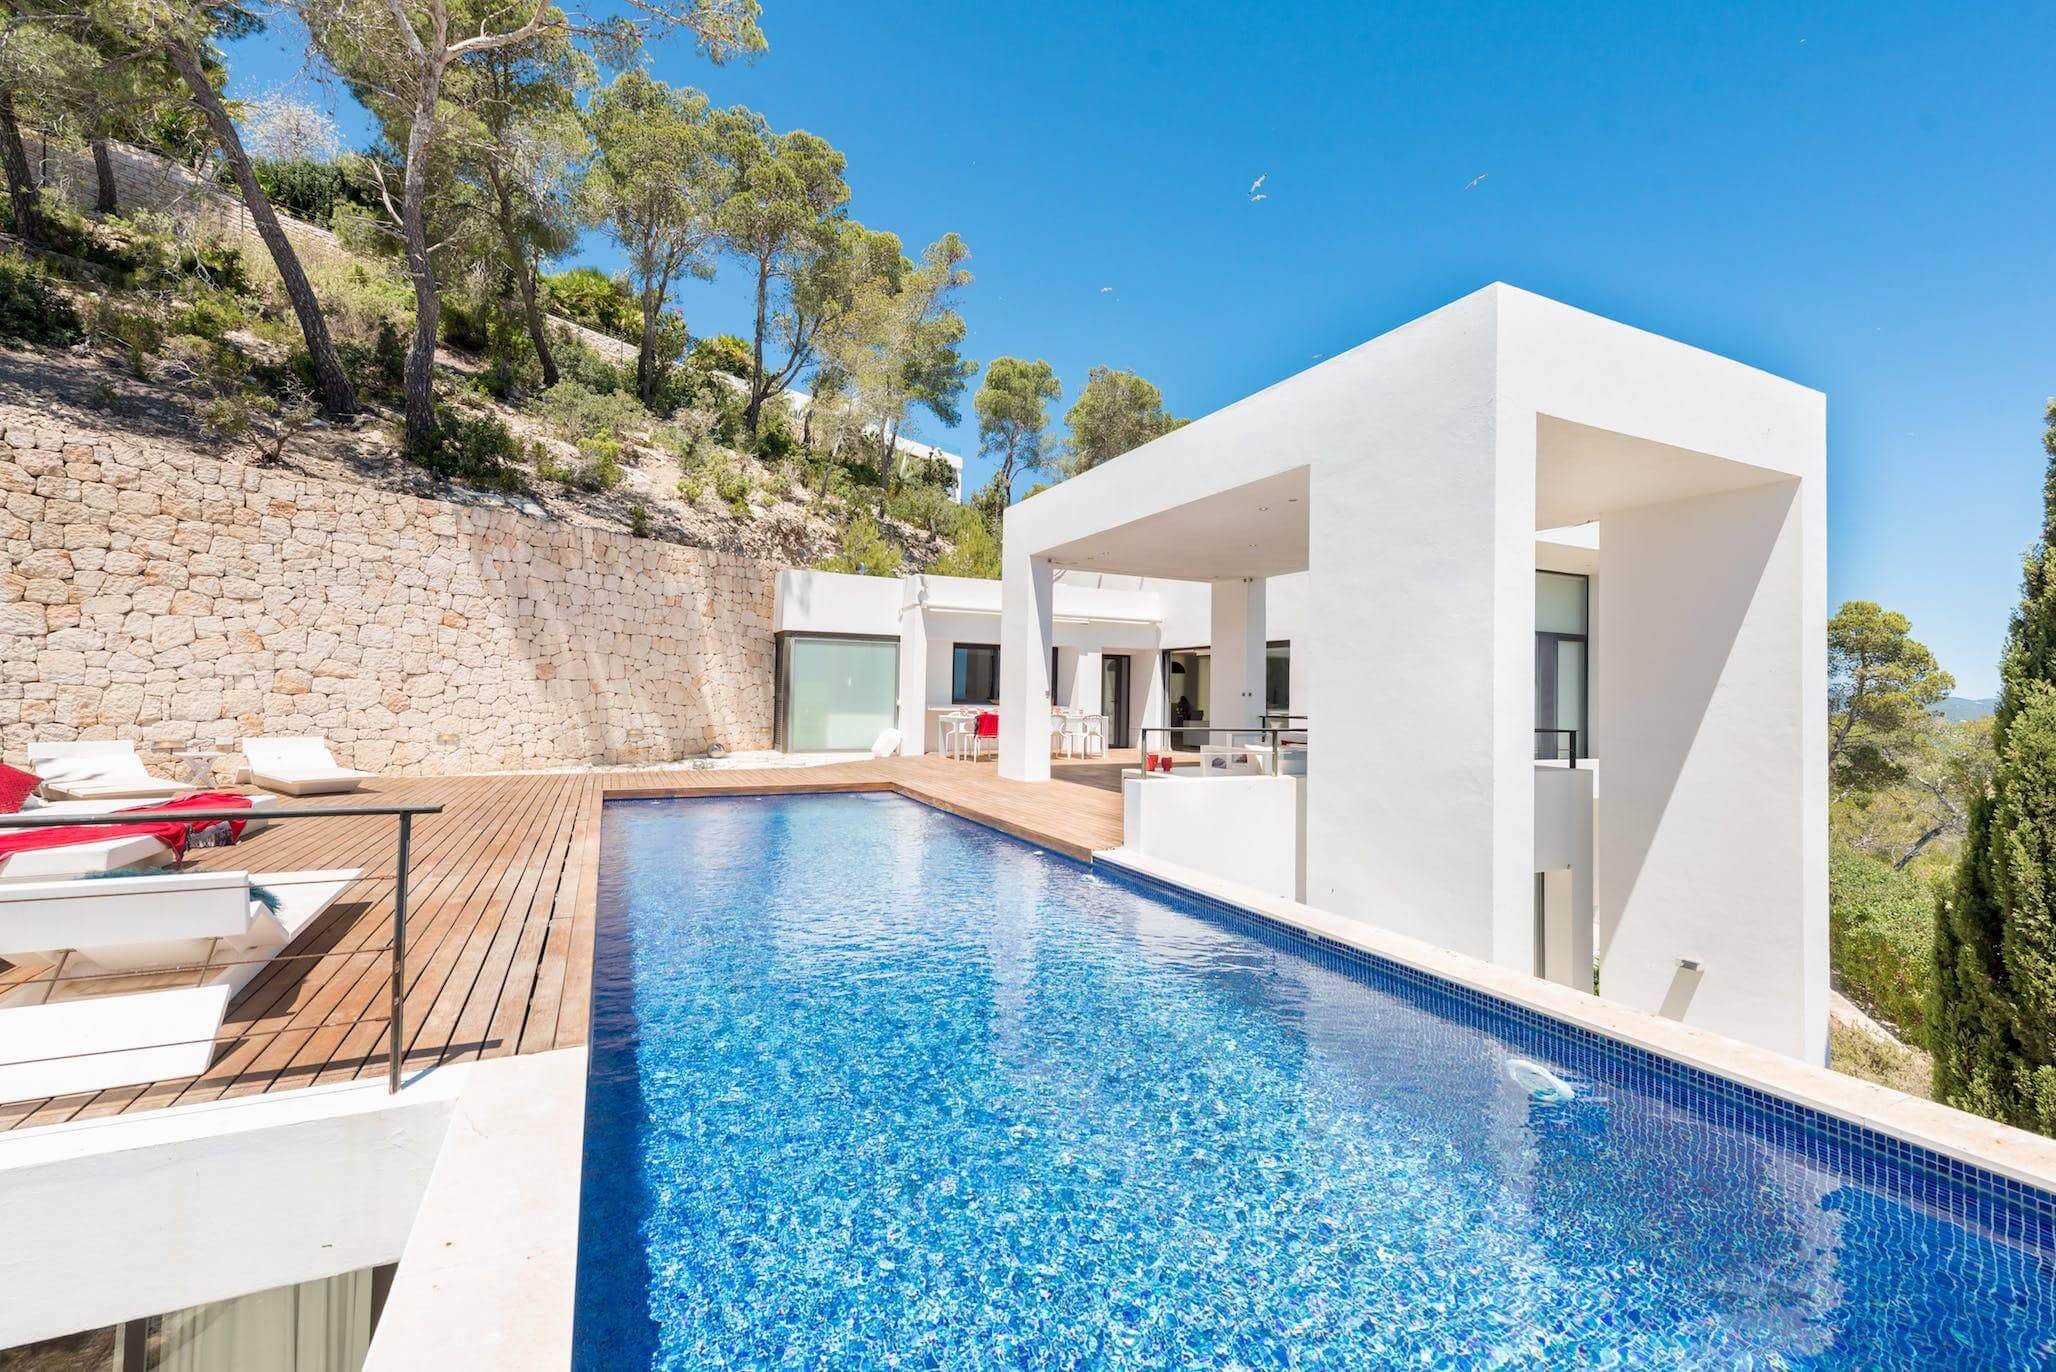 You are currently viewing Vista Infinita “Impeccable modern property on Ibiza’s east coast.”